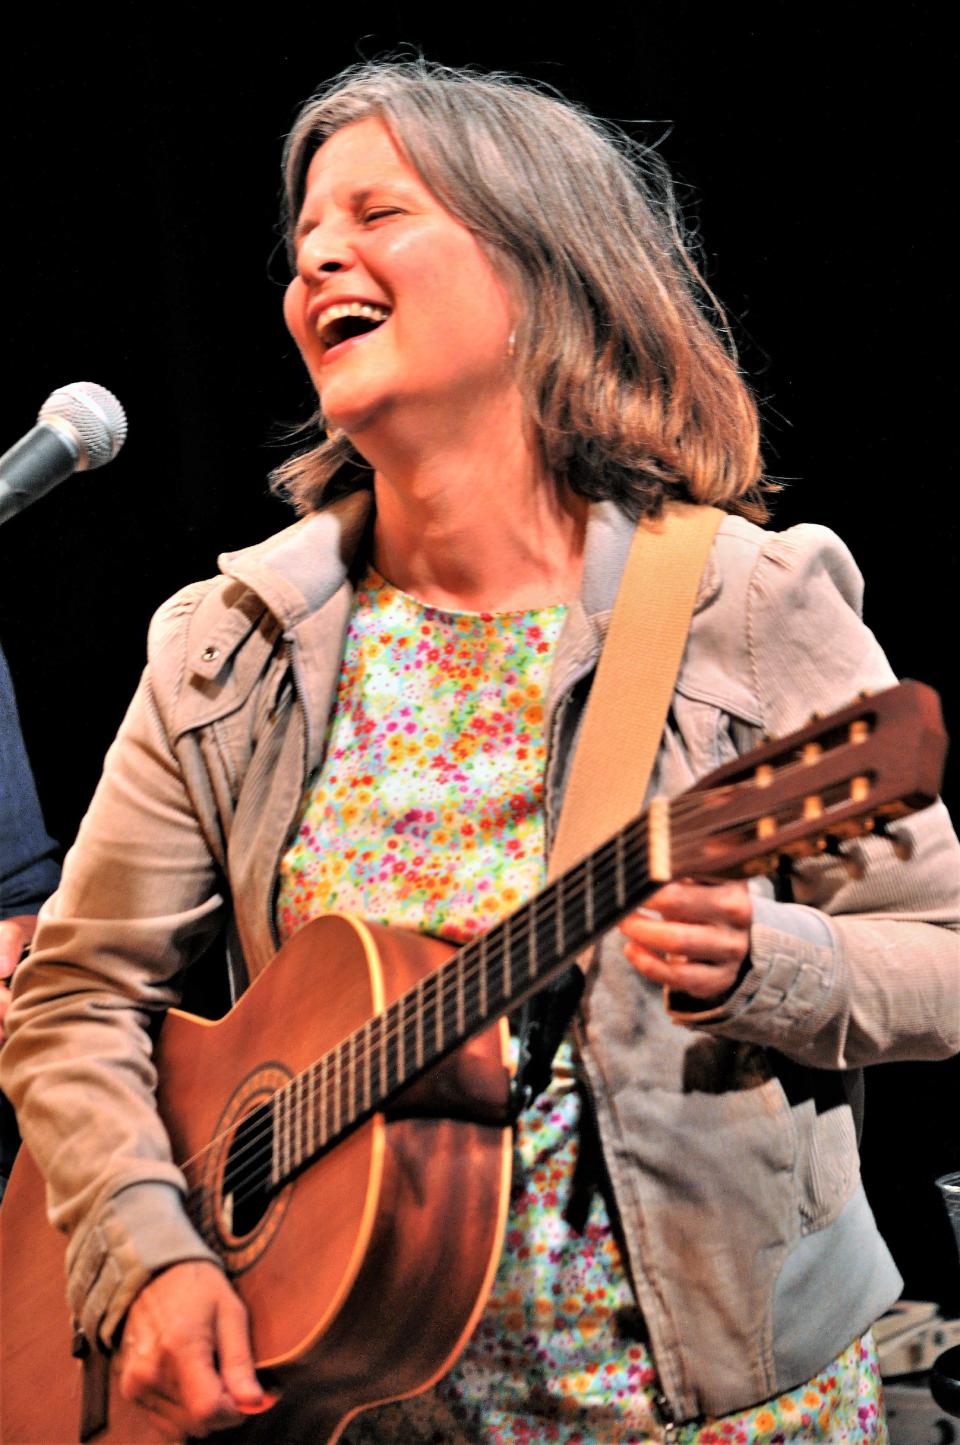 Jenifer Jackson will play as part of a new summer Music & More concert series as the Cape Cod Museum of Art in Dennis.